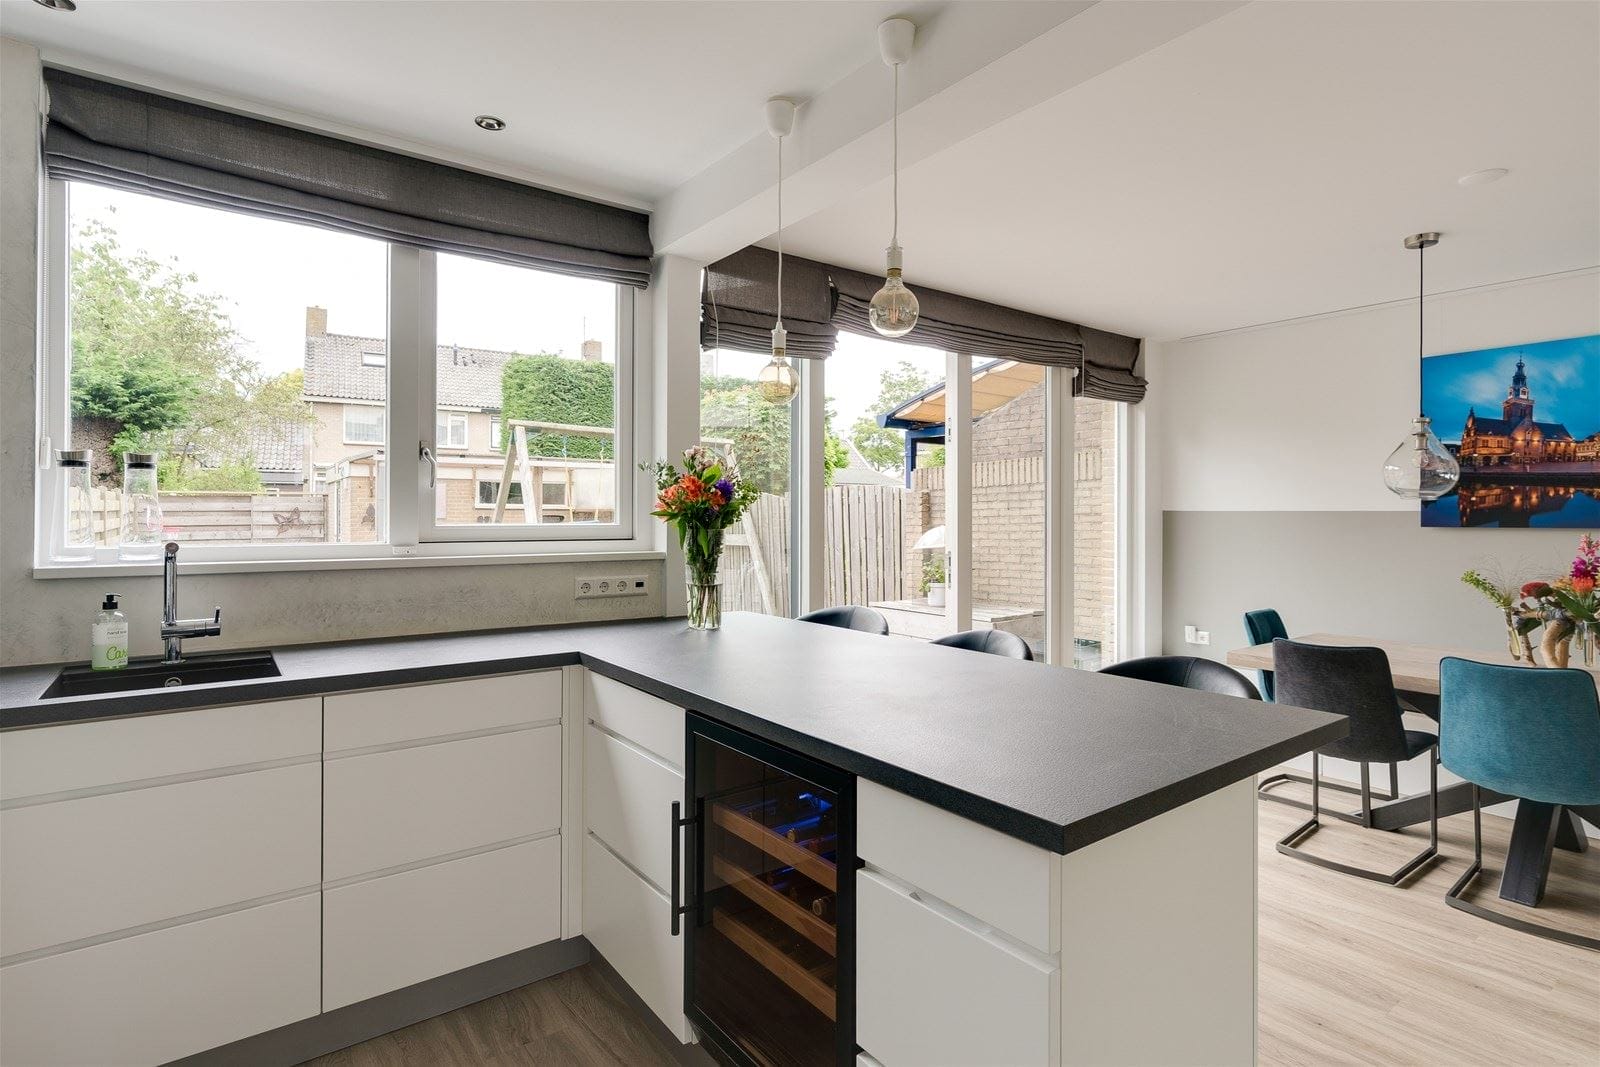 Modern kitchen with white cabinets and black worktop, equipped with a built-in wine cooler (40 bottles, multiple zones, 84cm height) and a dining area with blue chairs and colorful art on the wall.